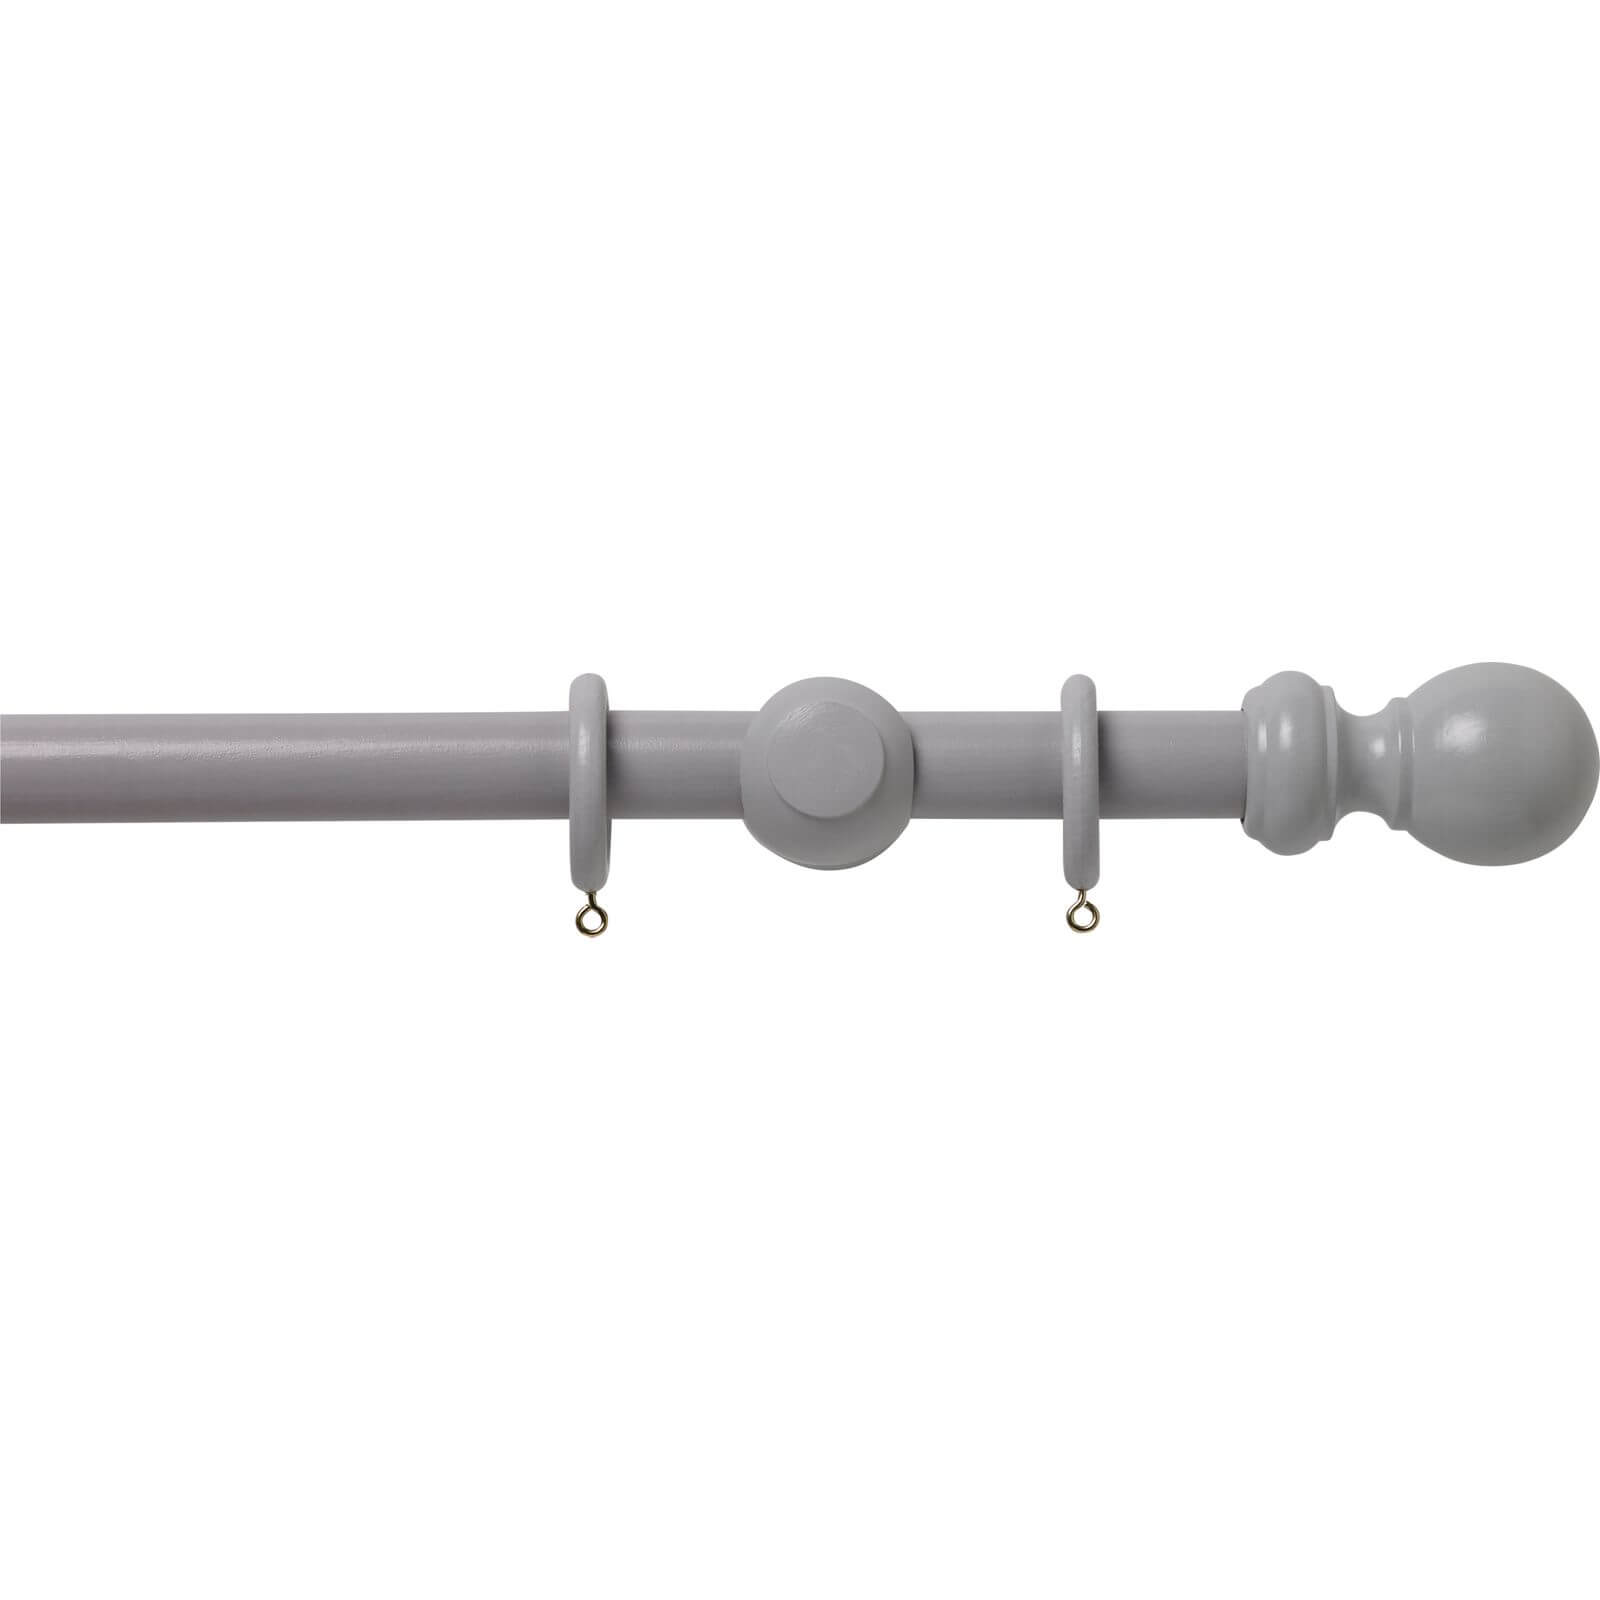 Photo of Grey Wood 28mm Curtain Pole With Ball Finials - 1.2m